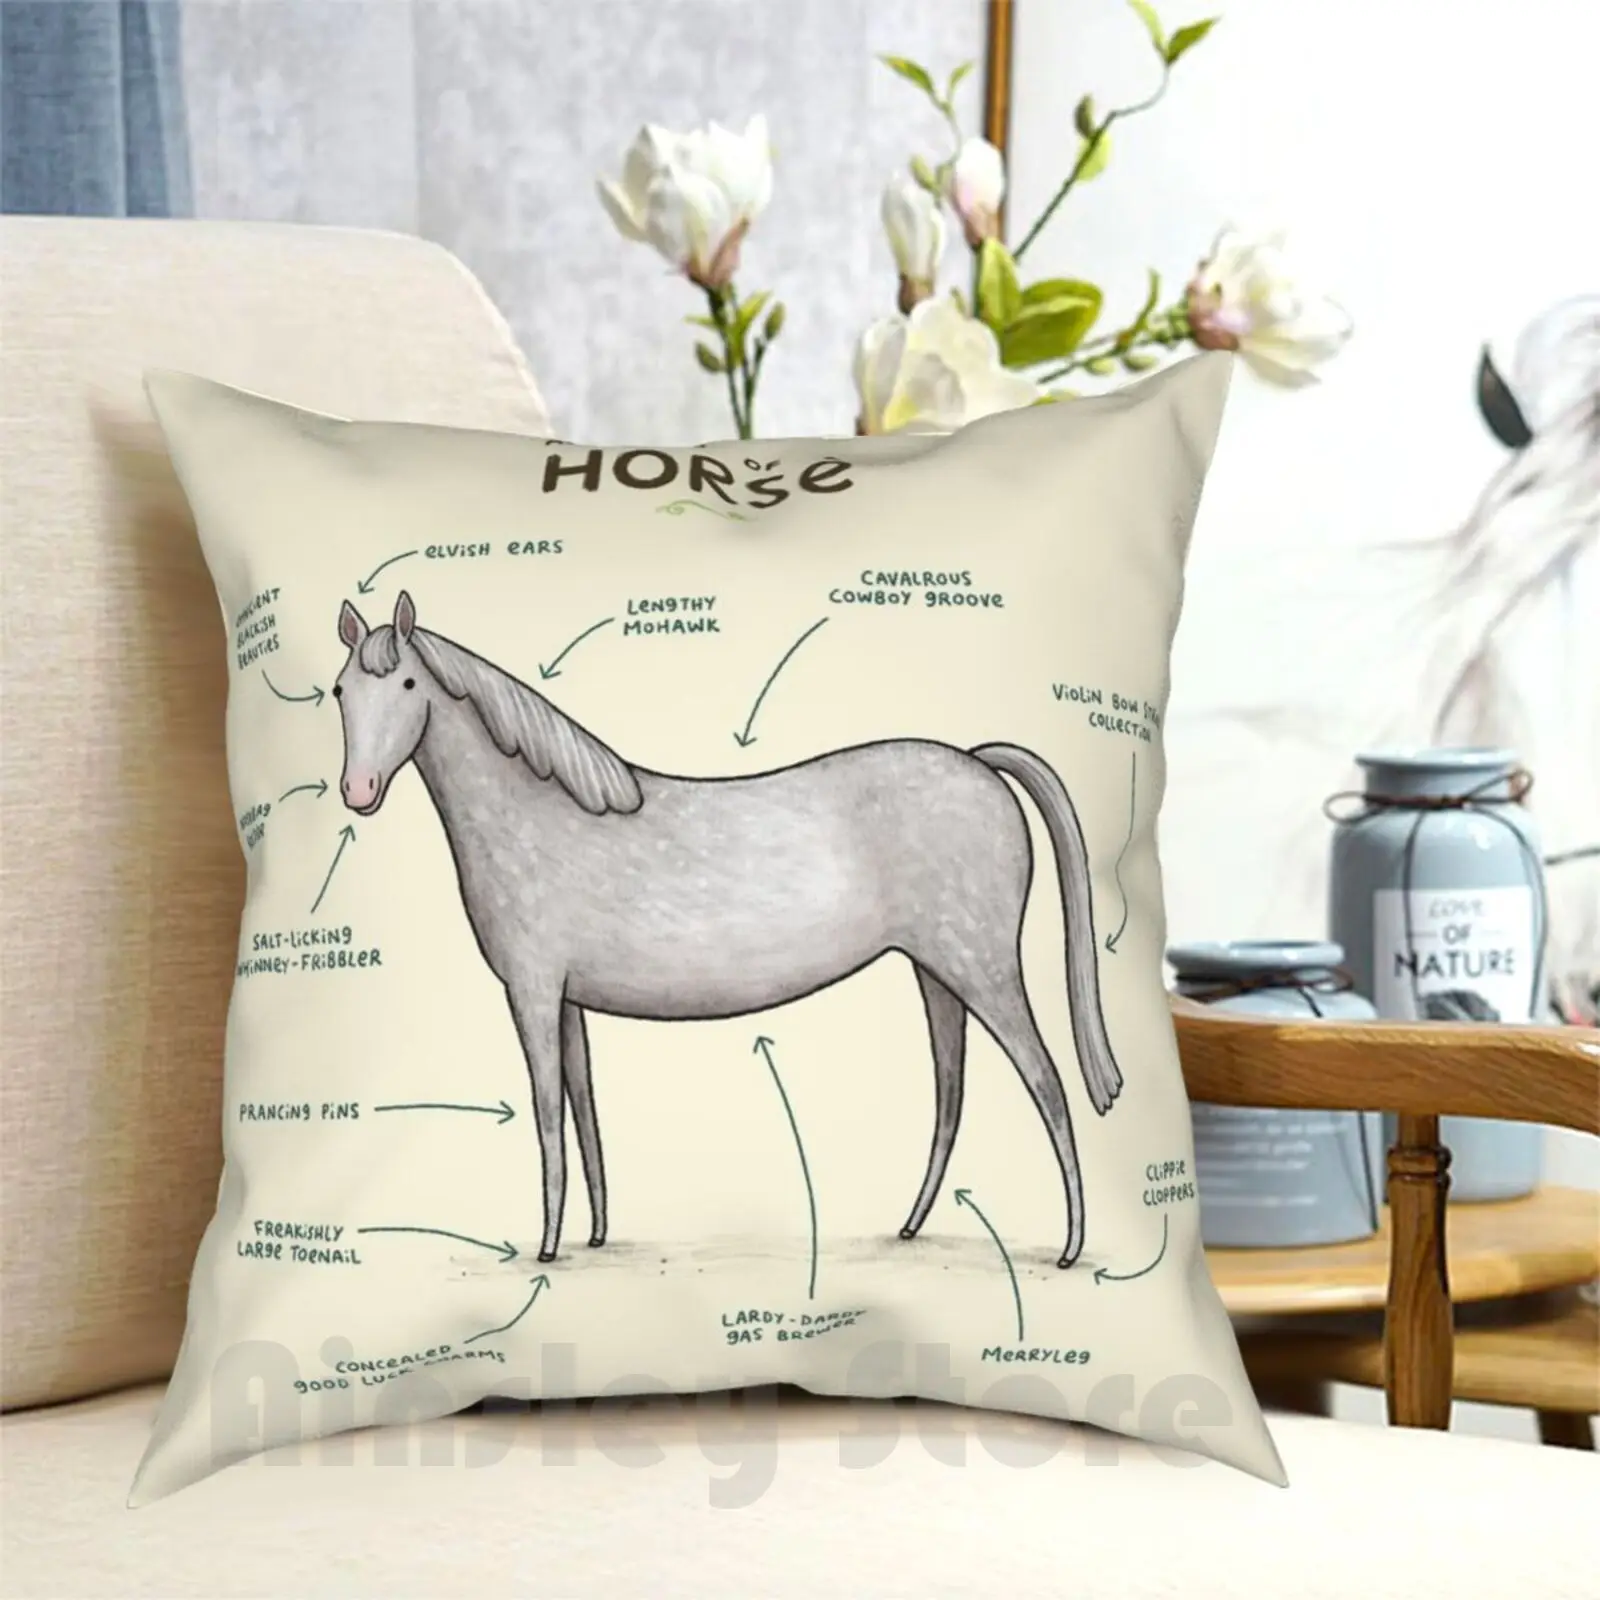 

Anatomy Of A Horse Pillow Case Printed Home Soft DIY Pillow cover Anatomy Funny Comedy Humour Humor Silly Animal Animals